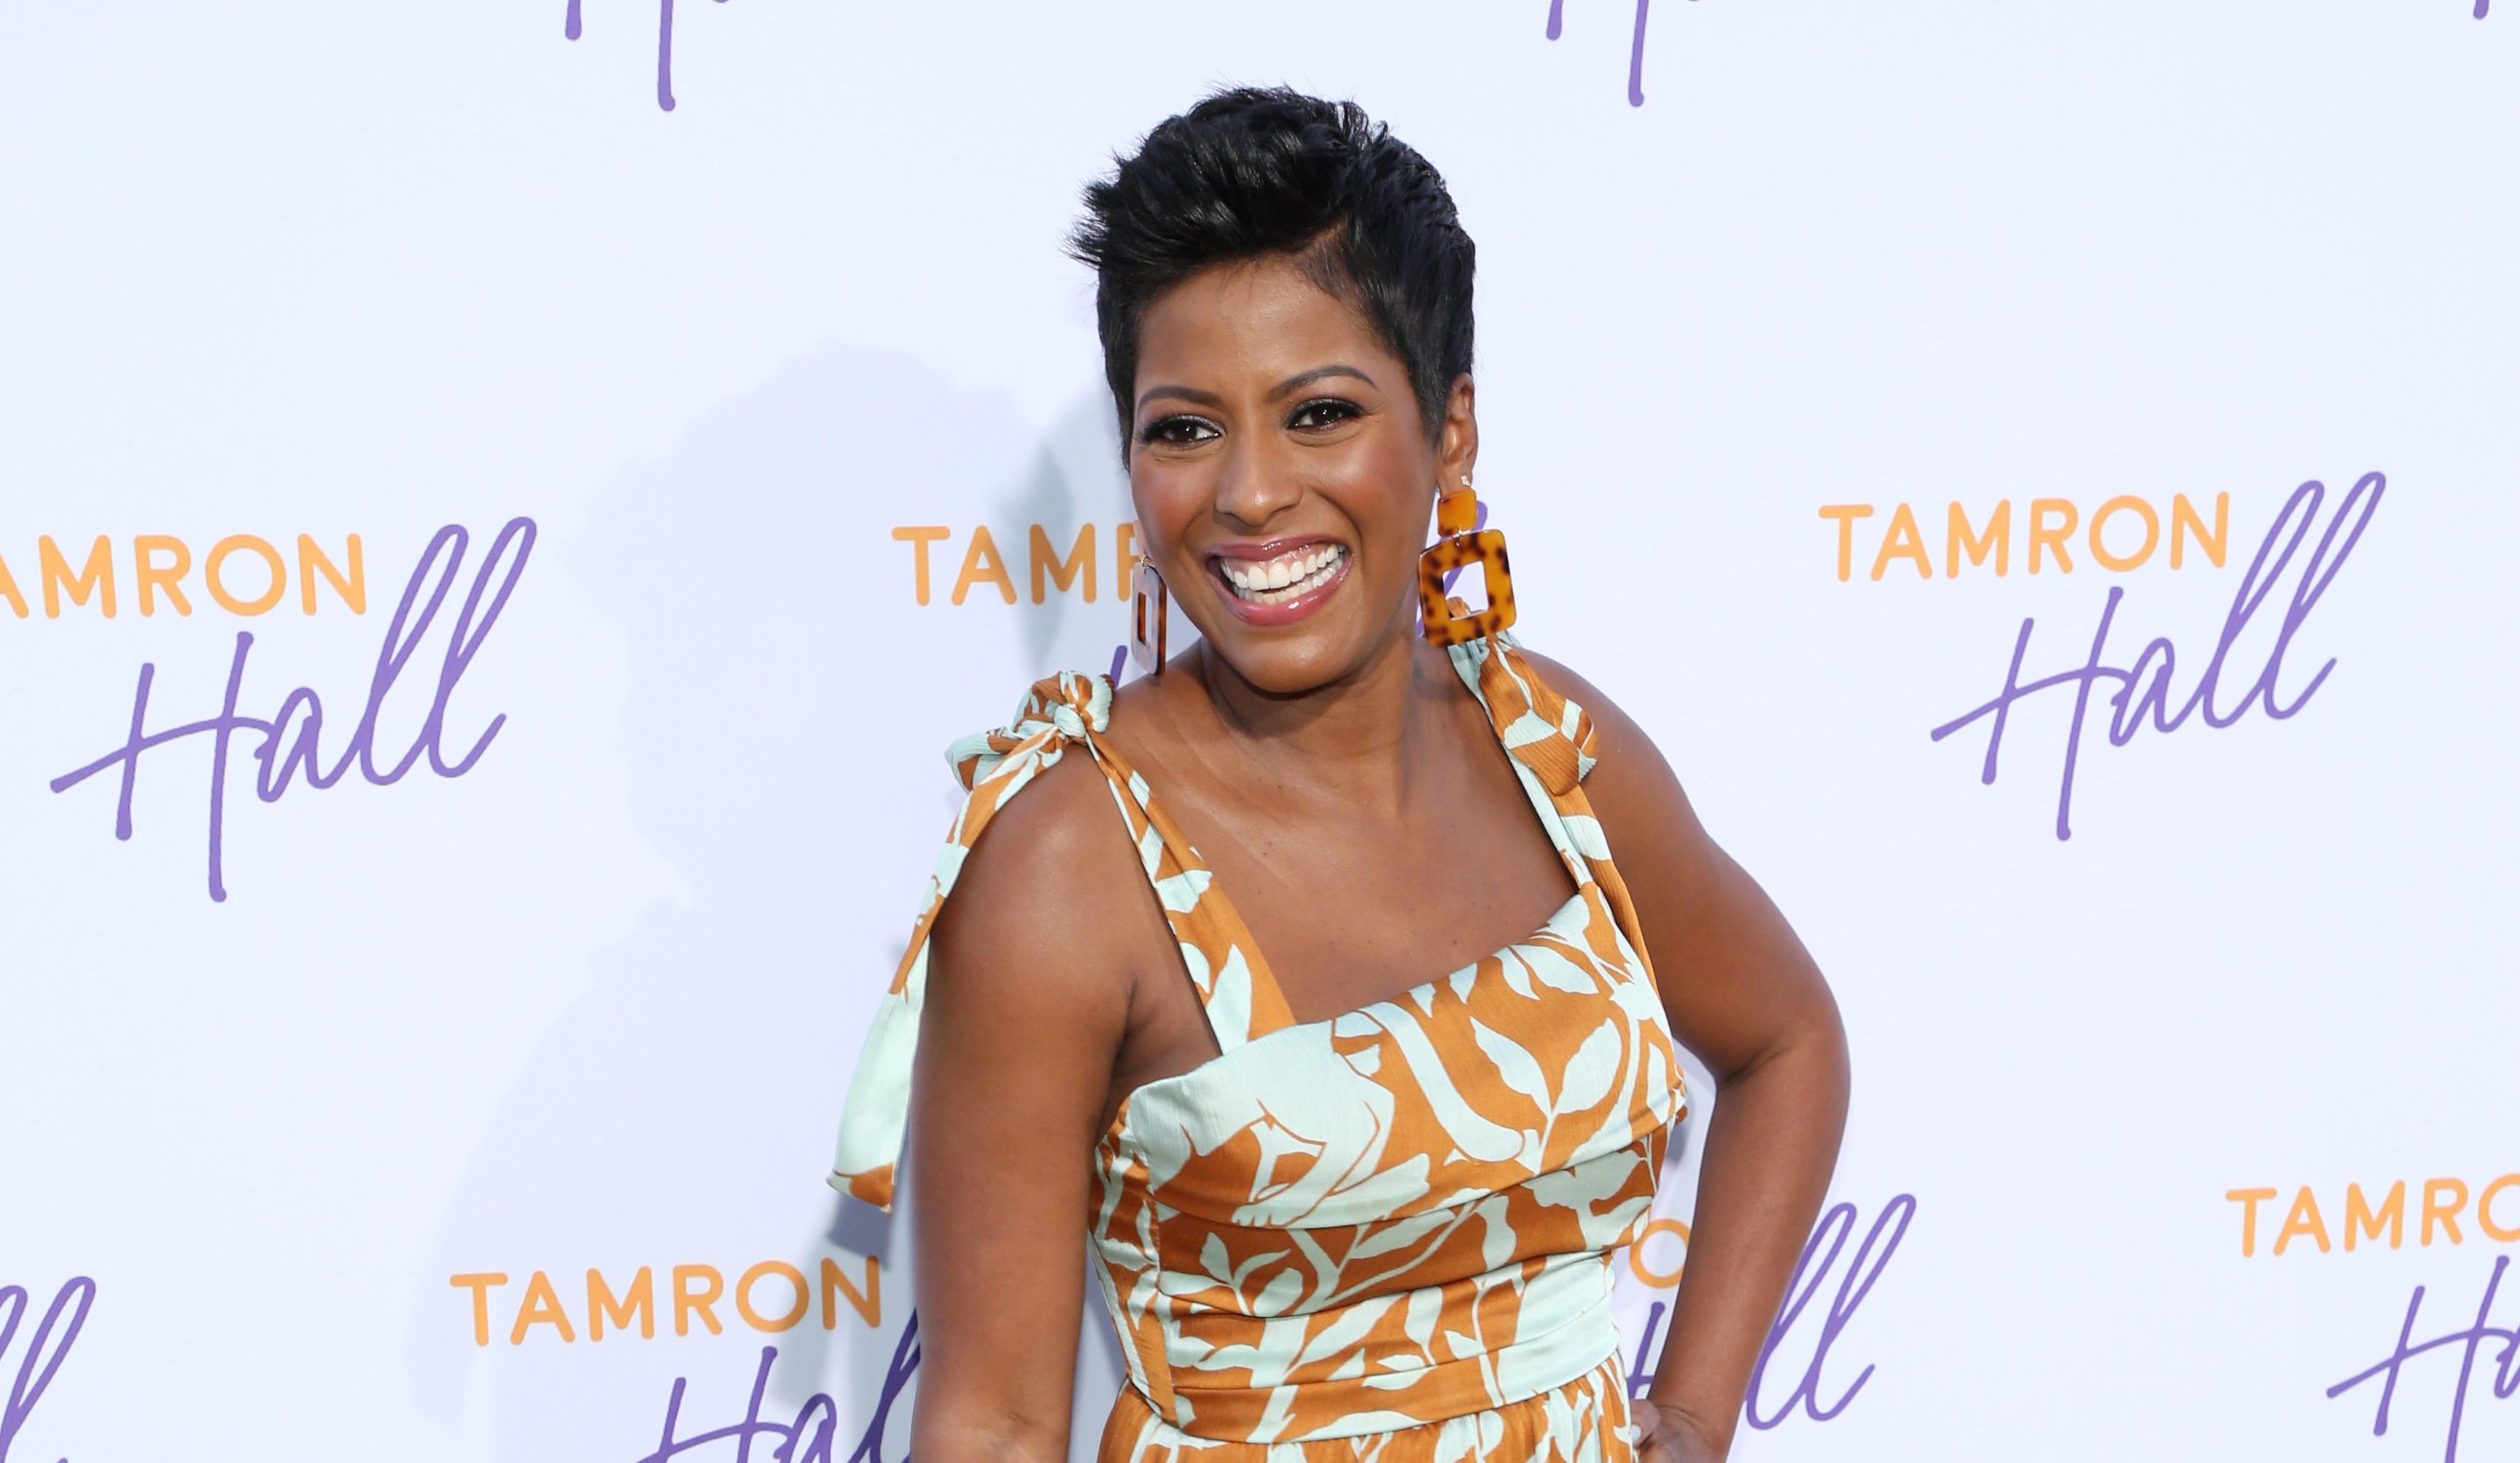 Why Did Tamron Hall Leave the 'Today' Show? Details on Her Exit